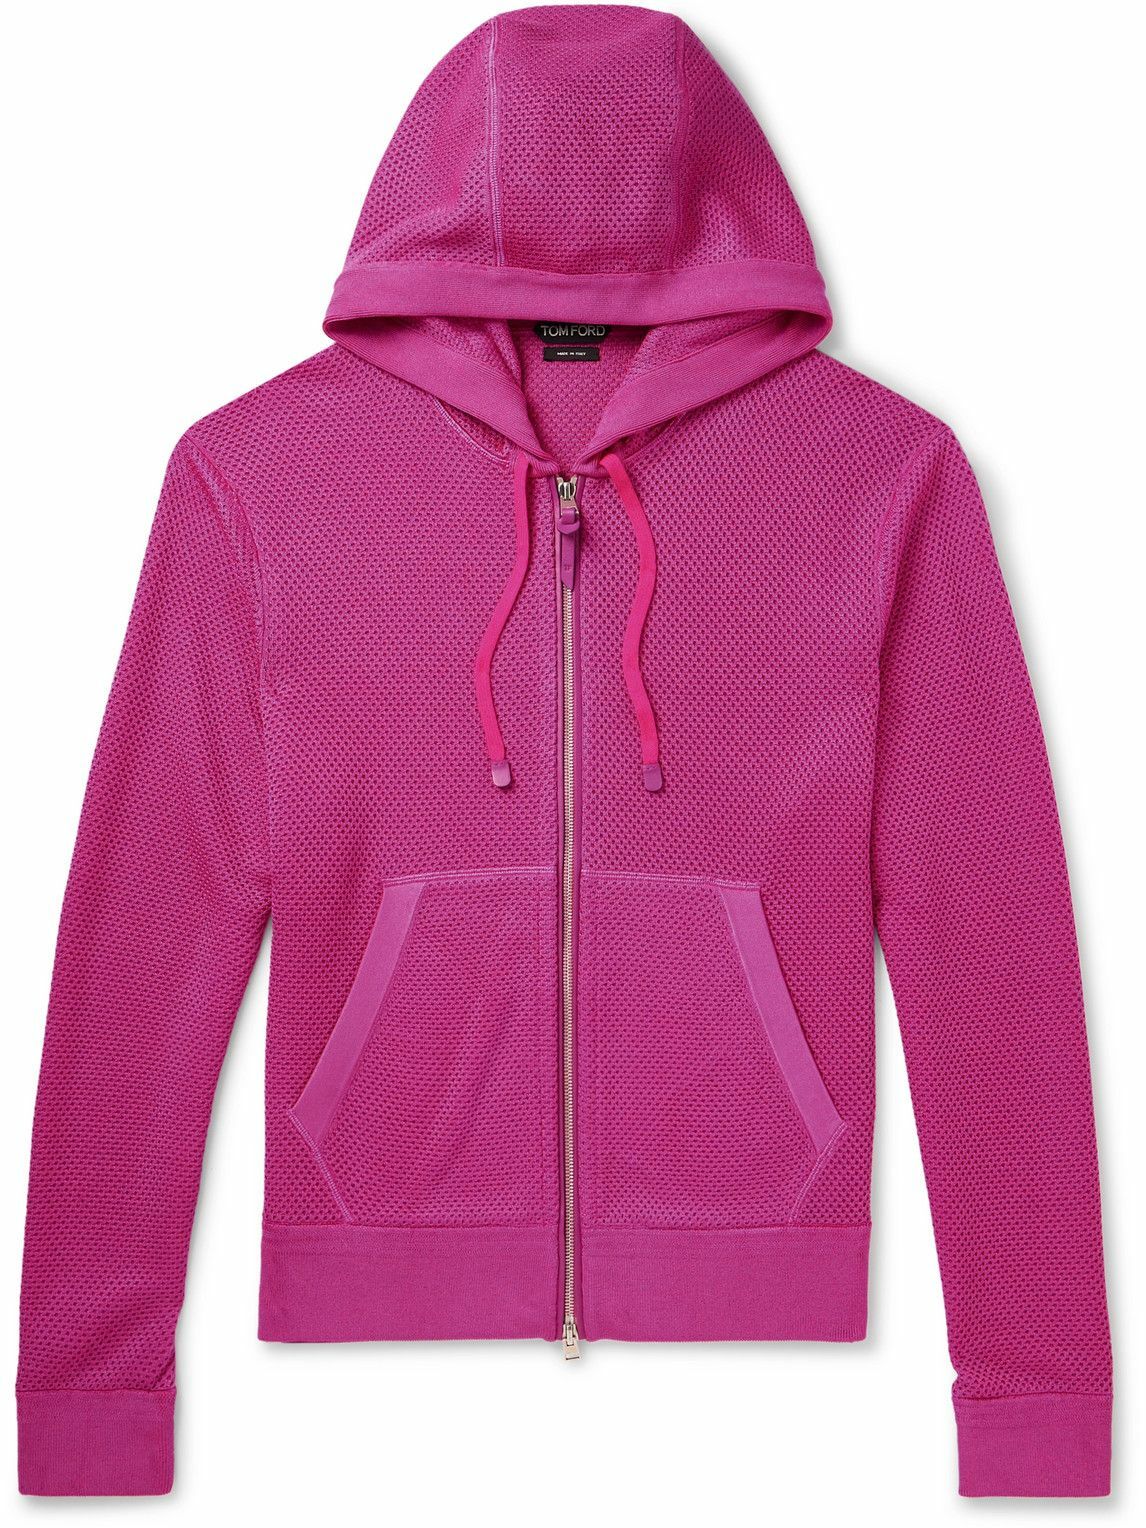 TOM FORD - Leather-Trimmed Mesh Zip-Up Hoodie - Pink TOM FORD